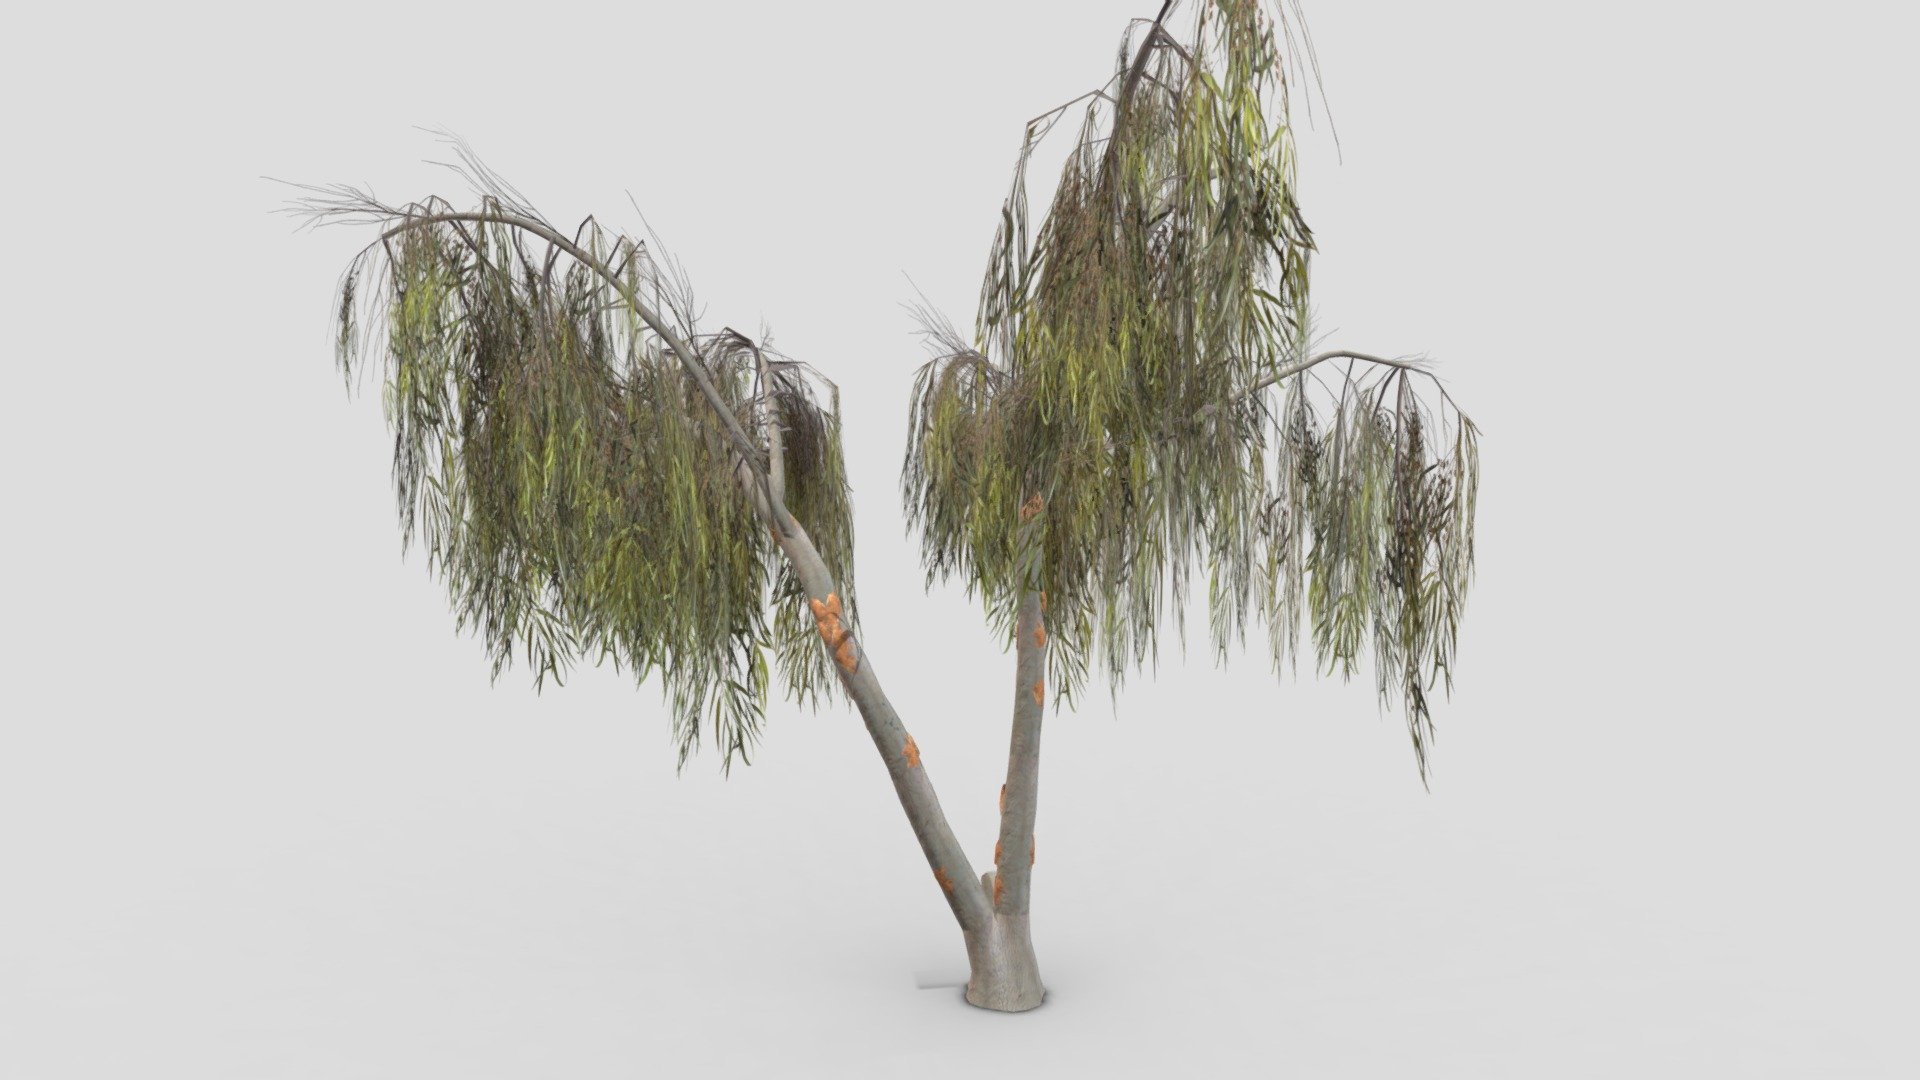 This is a low poly model of the Eucalyptus Aus Tree. I made this file for game developers and I try to provide lowpoly model 3d model